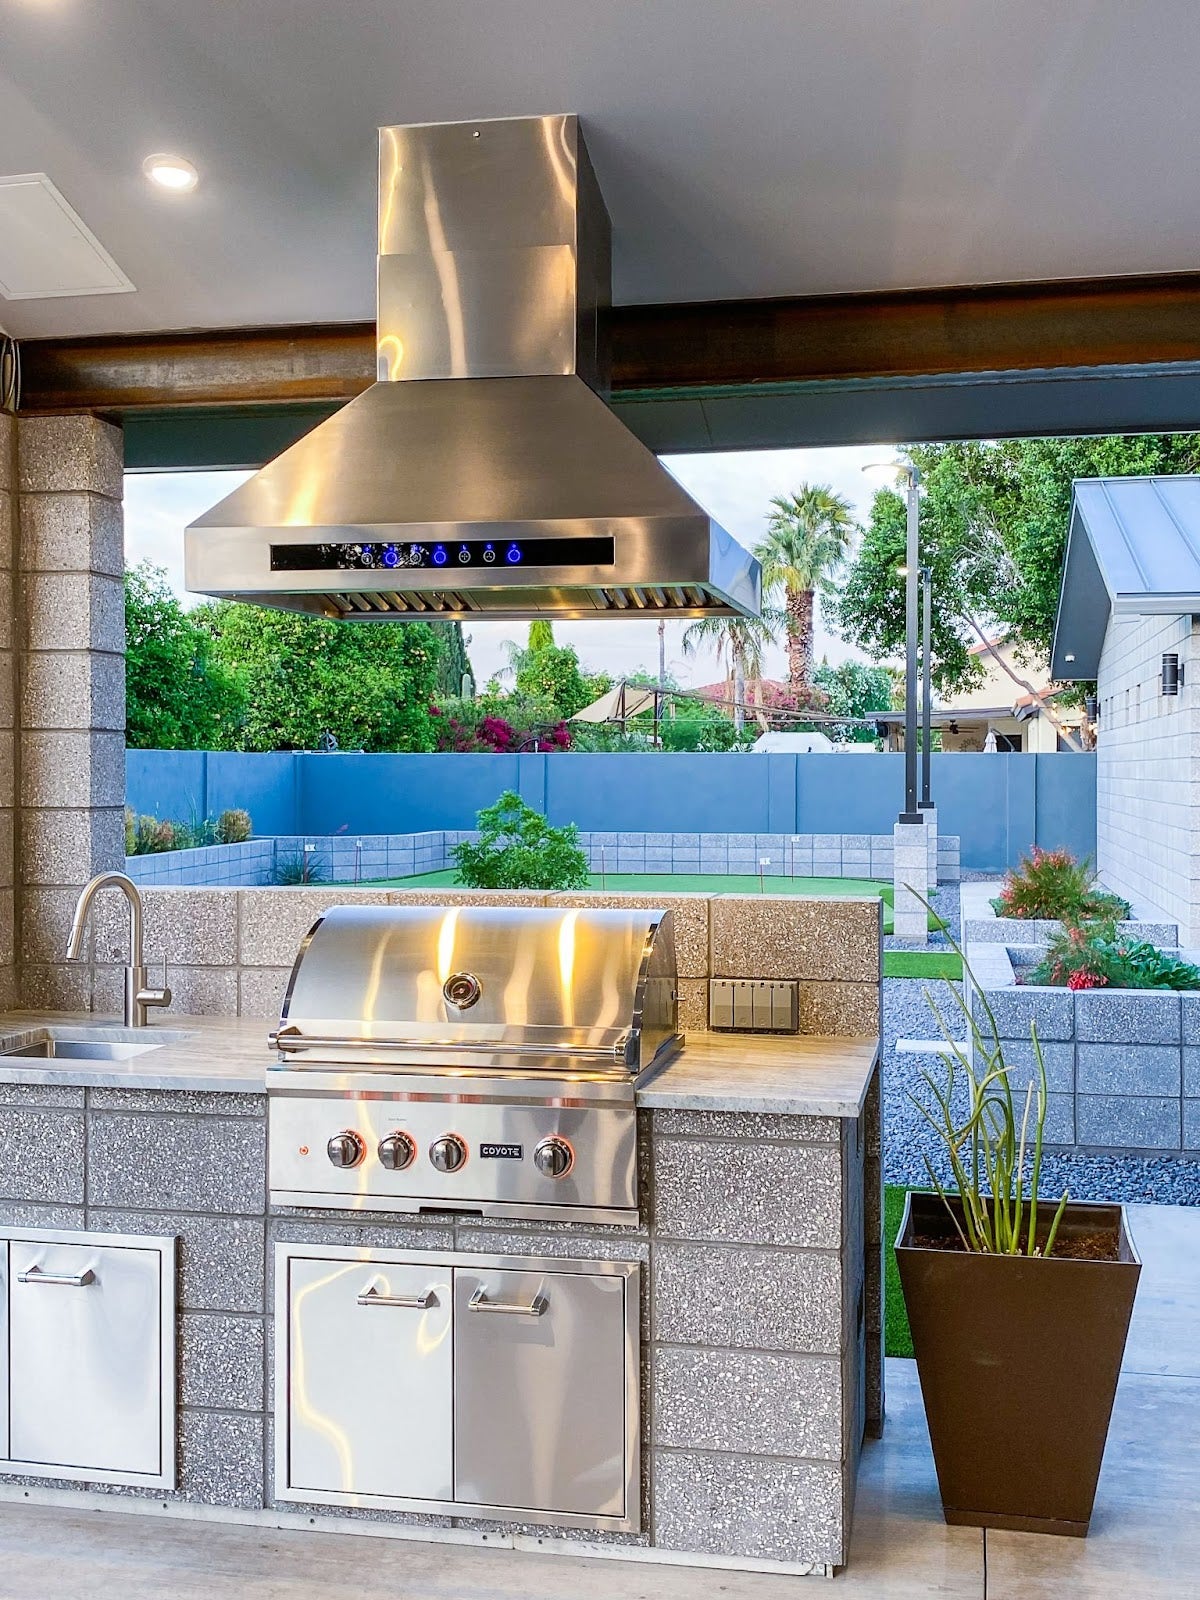 Elegant outdoor BBQ area featuring a high-end grill and stainless hood, nestled in a suburban oasis with lush greenery and modern landscaping.